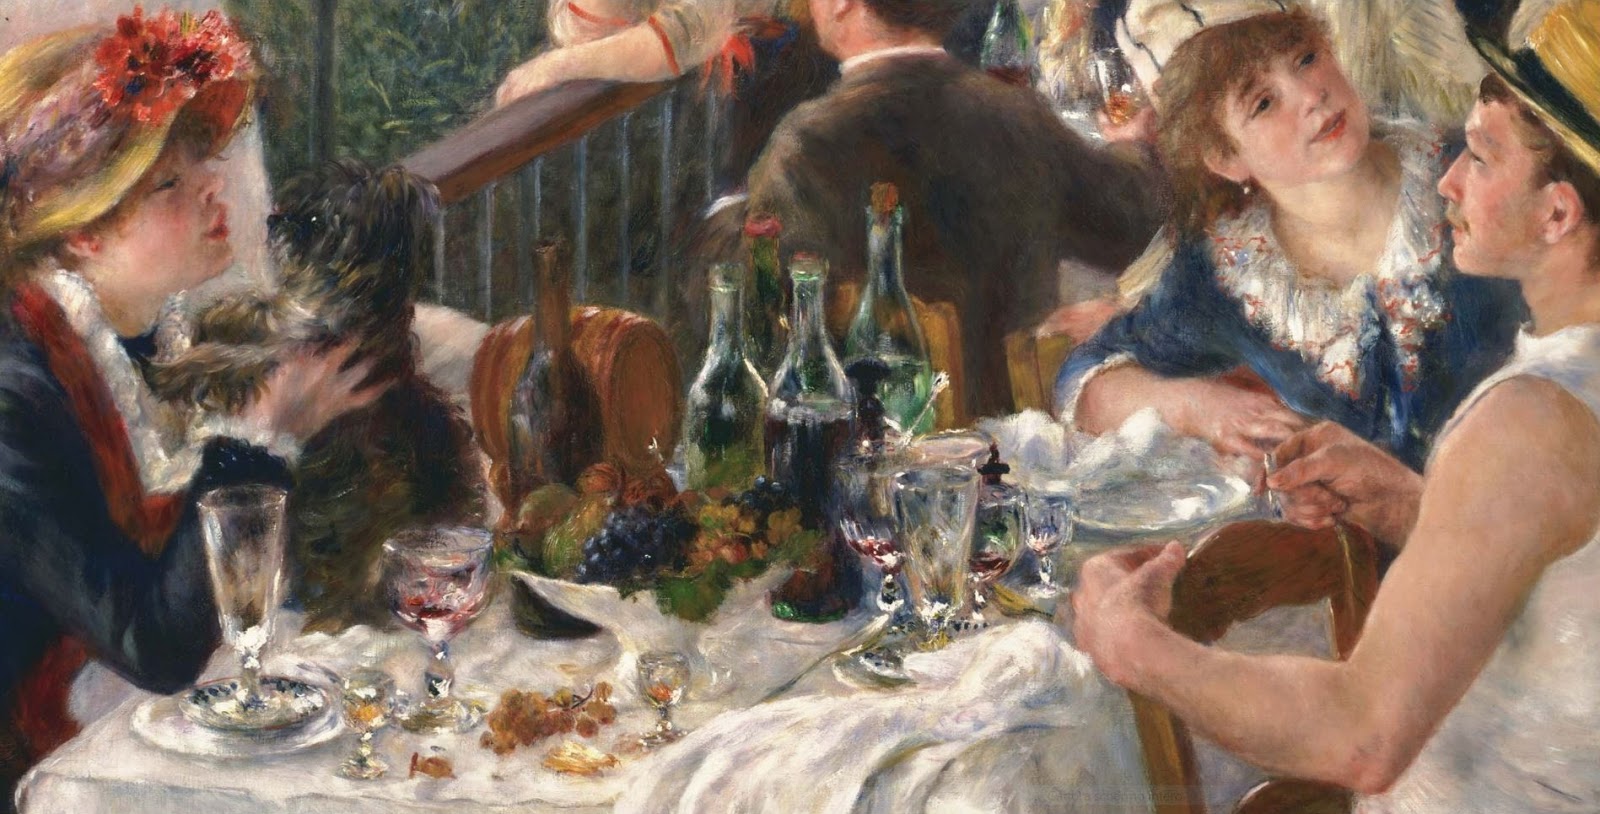 Black 3dRose The Luncheon of The Boating Party by Pierre-Auguste Renoir 22 by 30-Inch with Pockets Full Length Apron apr_127354_4